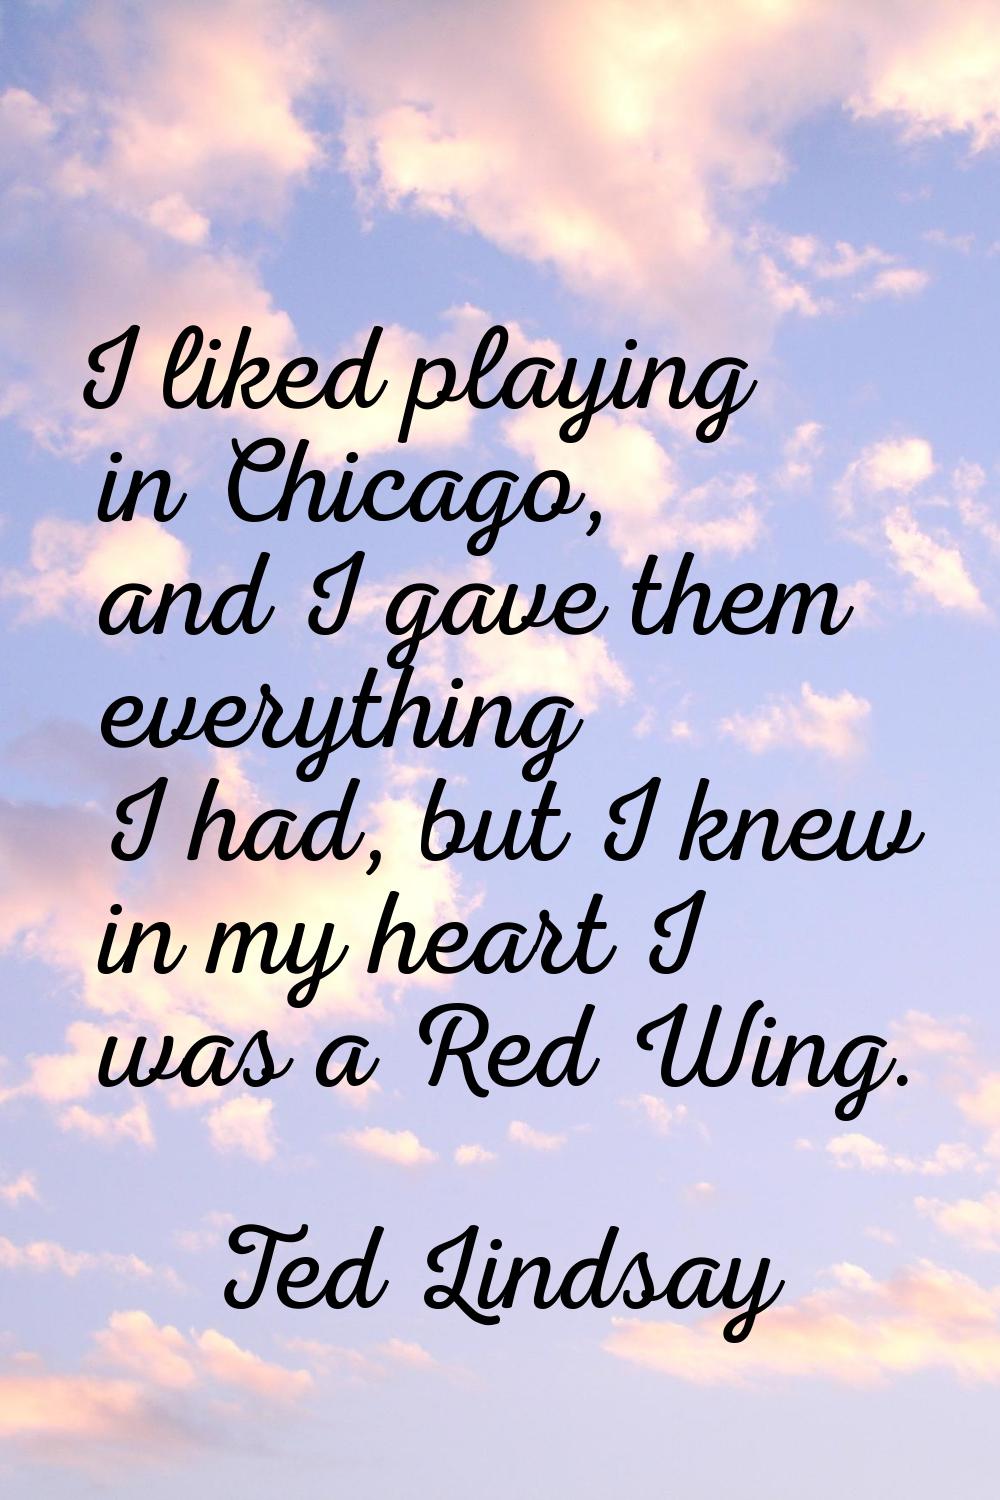 I liked playing in Chicago, and I gave them everything I had, but I knew in my heart I was a Red Wi